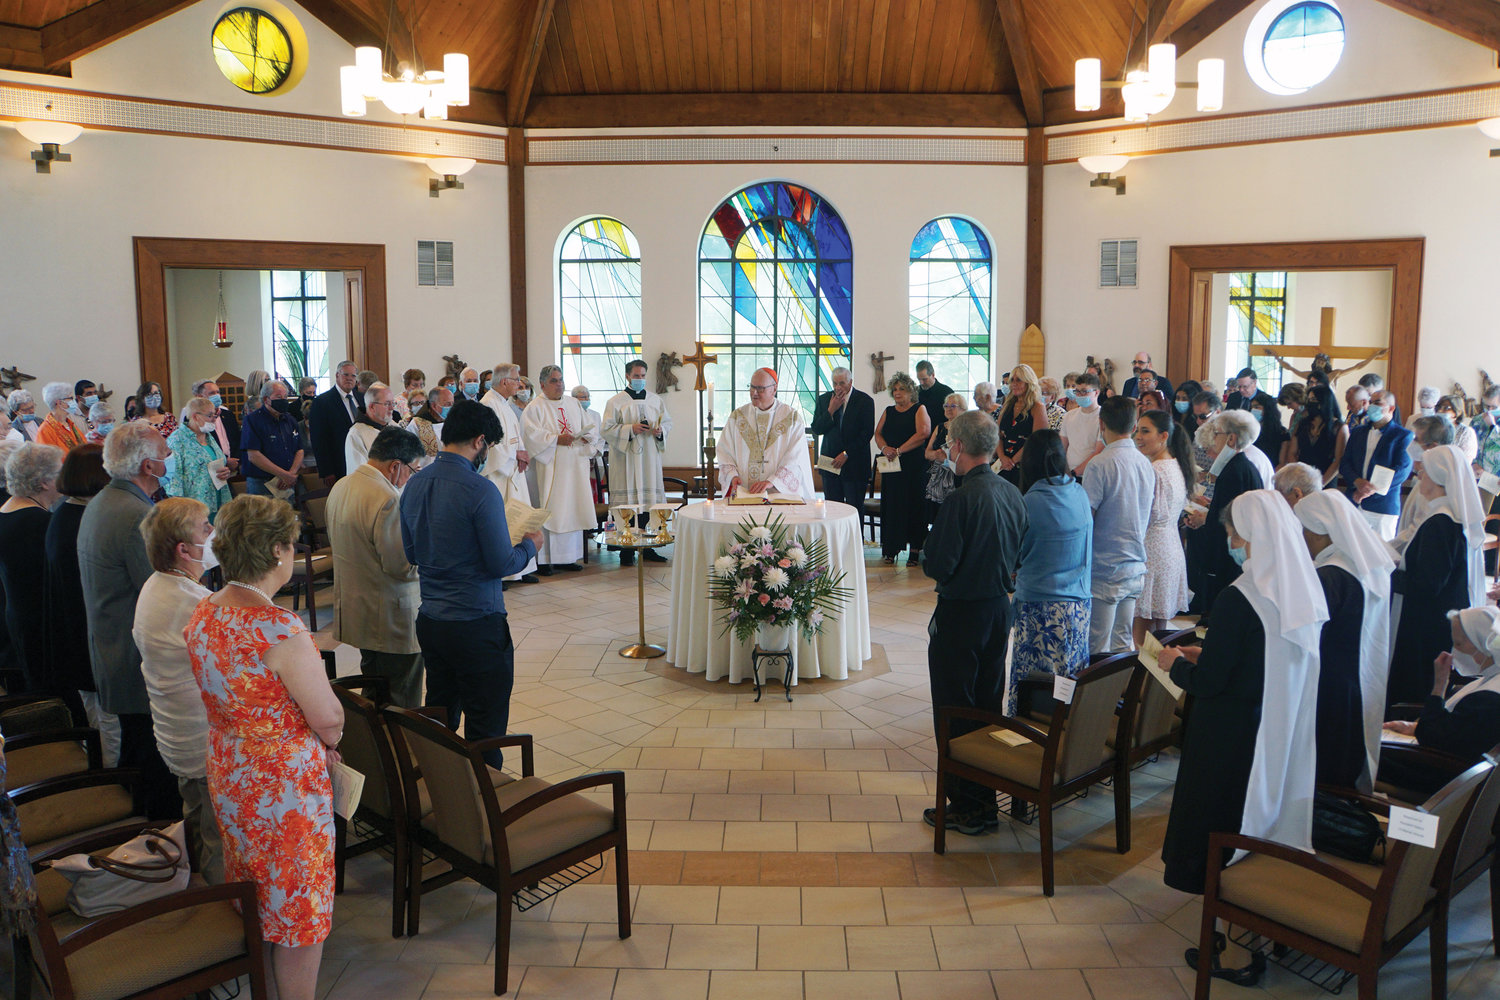 FILLED WITH COMMUNITY—Sisters from six religious communities now live in retirement at Marian Woods in Hartsdale where Cardinal Dolan, top, offered Mass in the chapel to mark the convent’s 20th anniversary.